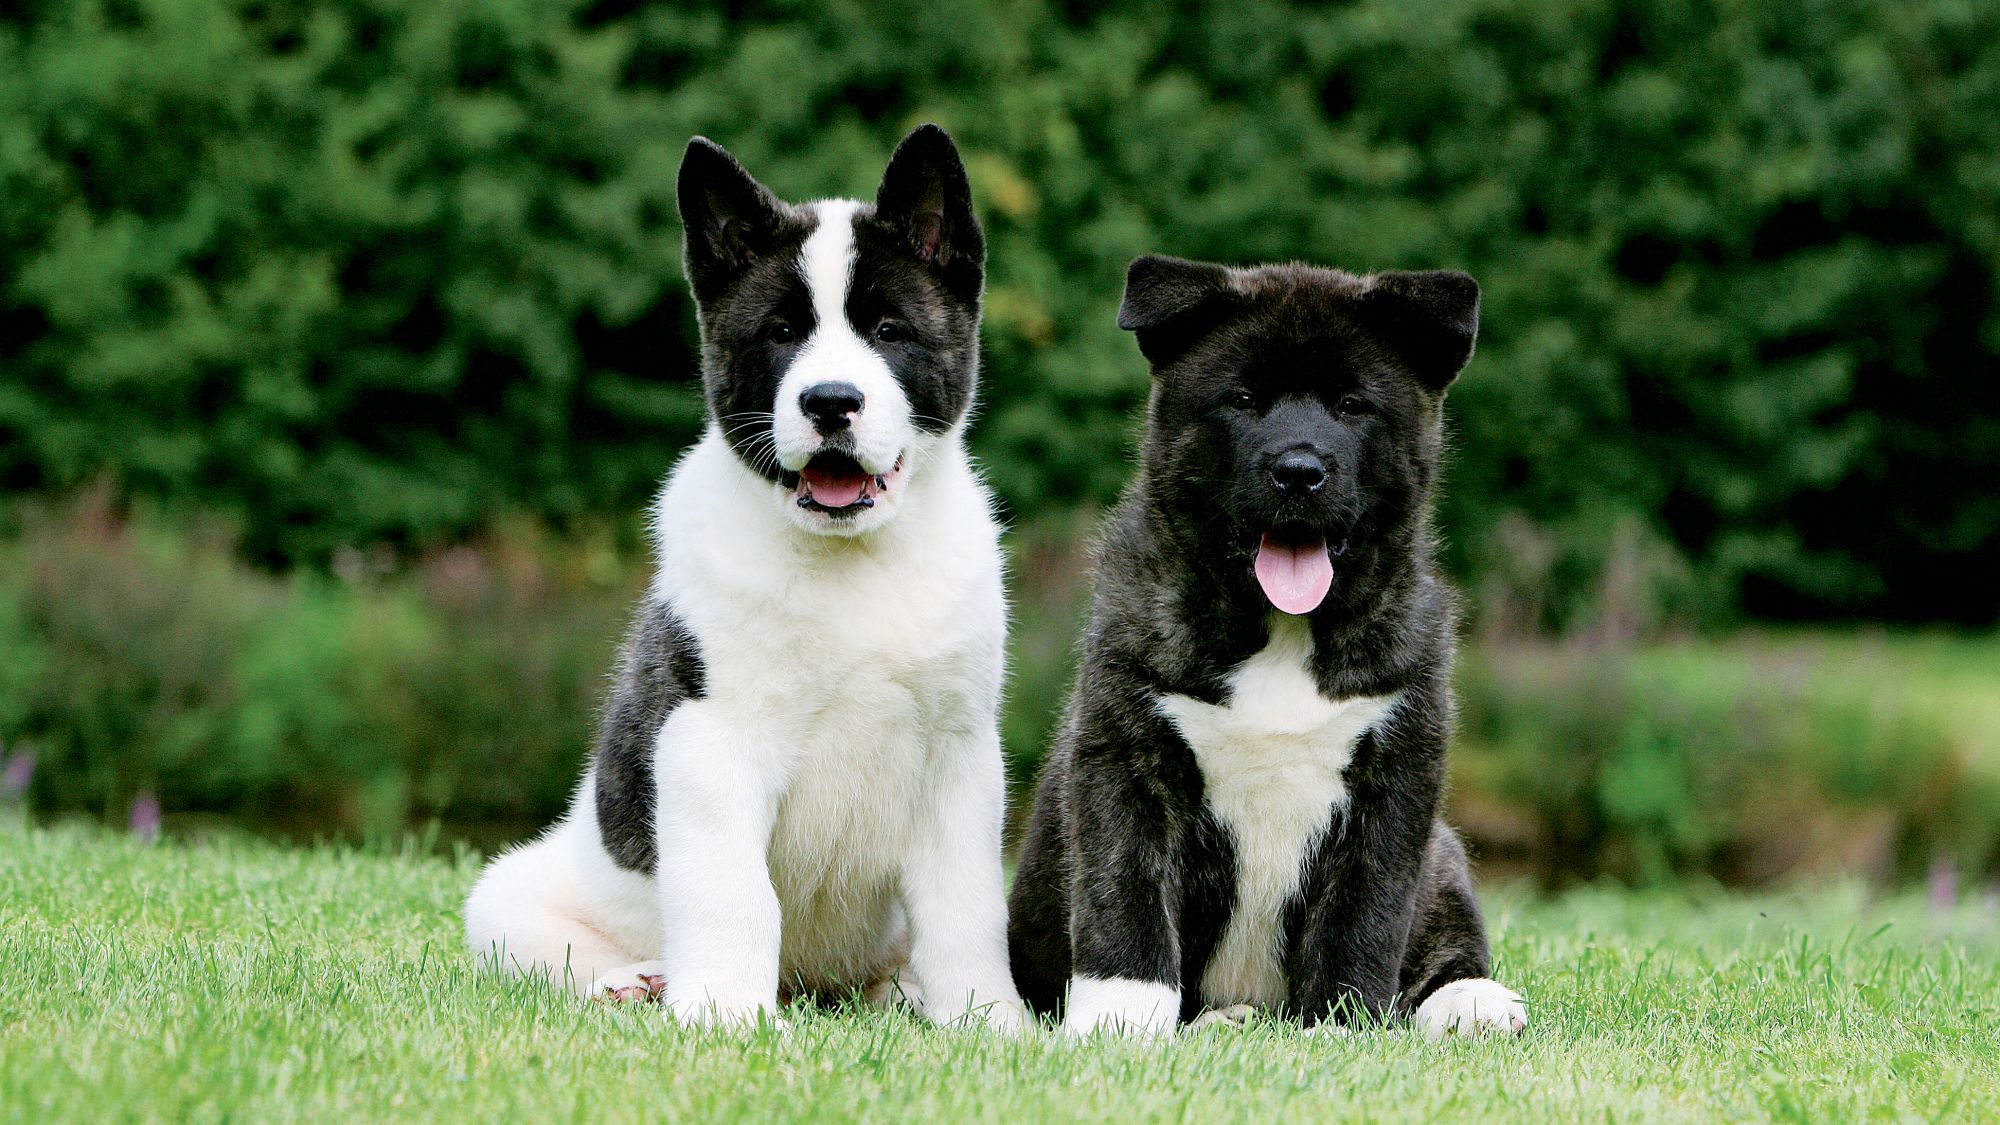 Two black and white American Akita puppies sat on the grass